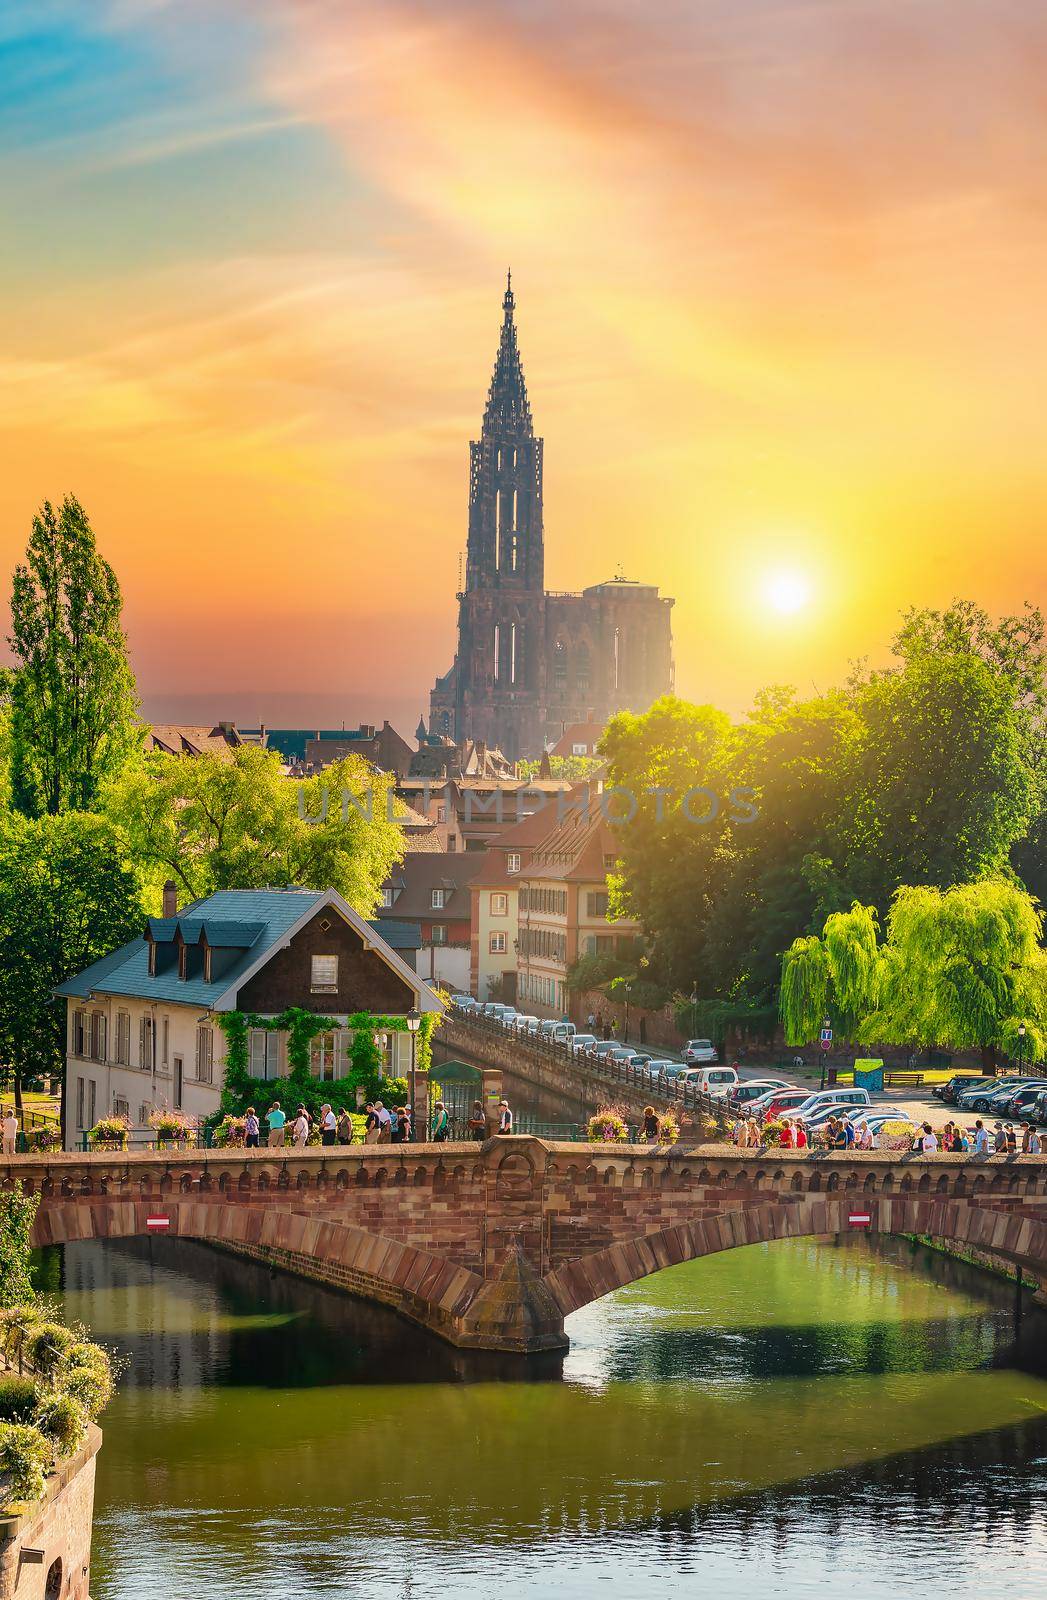 View of Covered Bridges in Strasbourg and cathedral